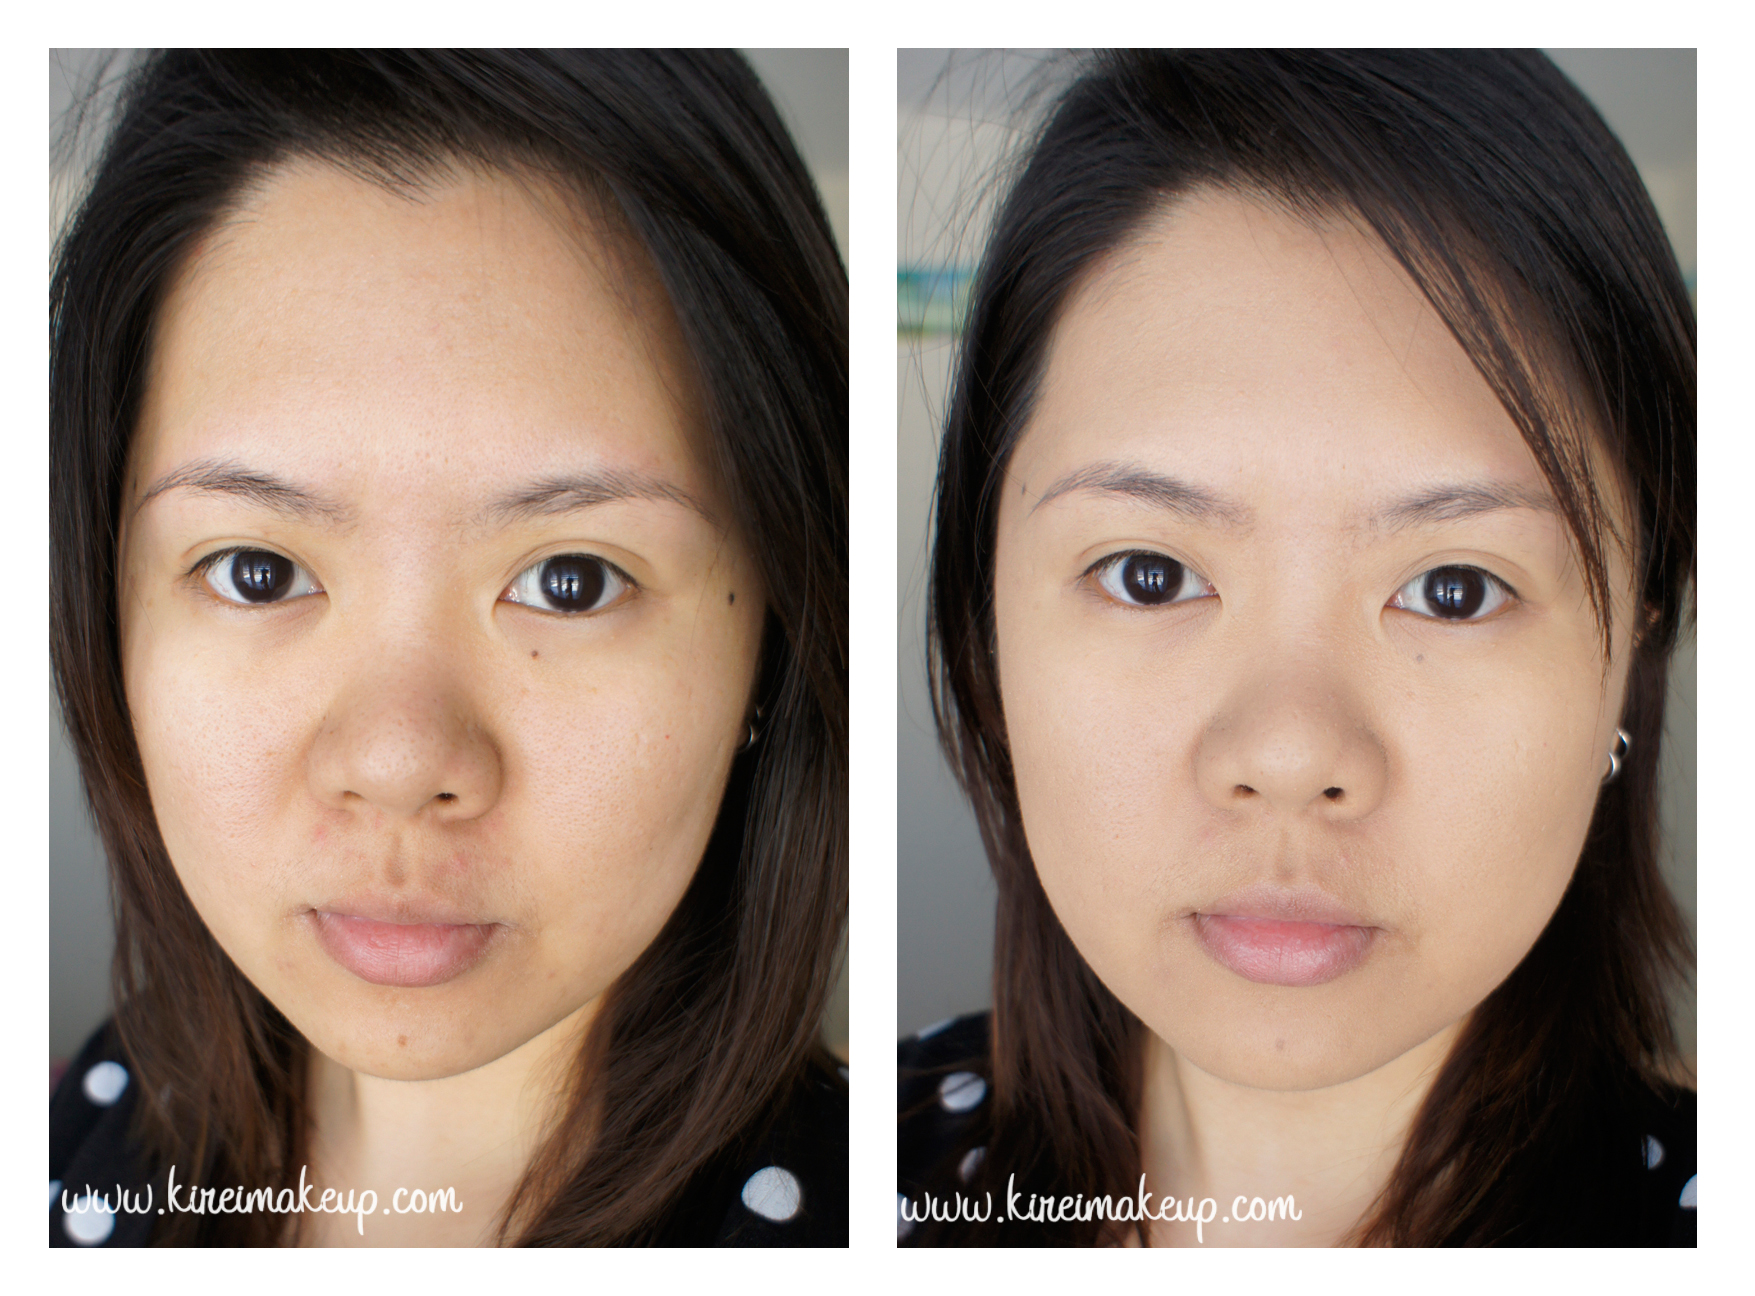 dior nude air foundation review